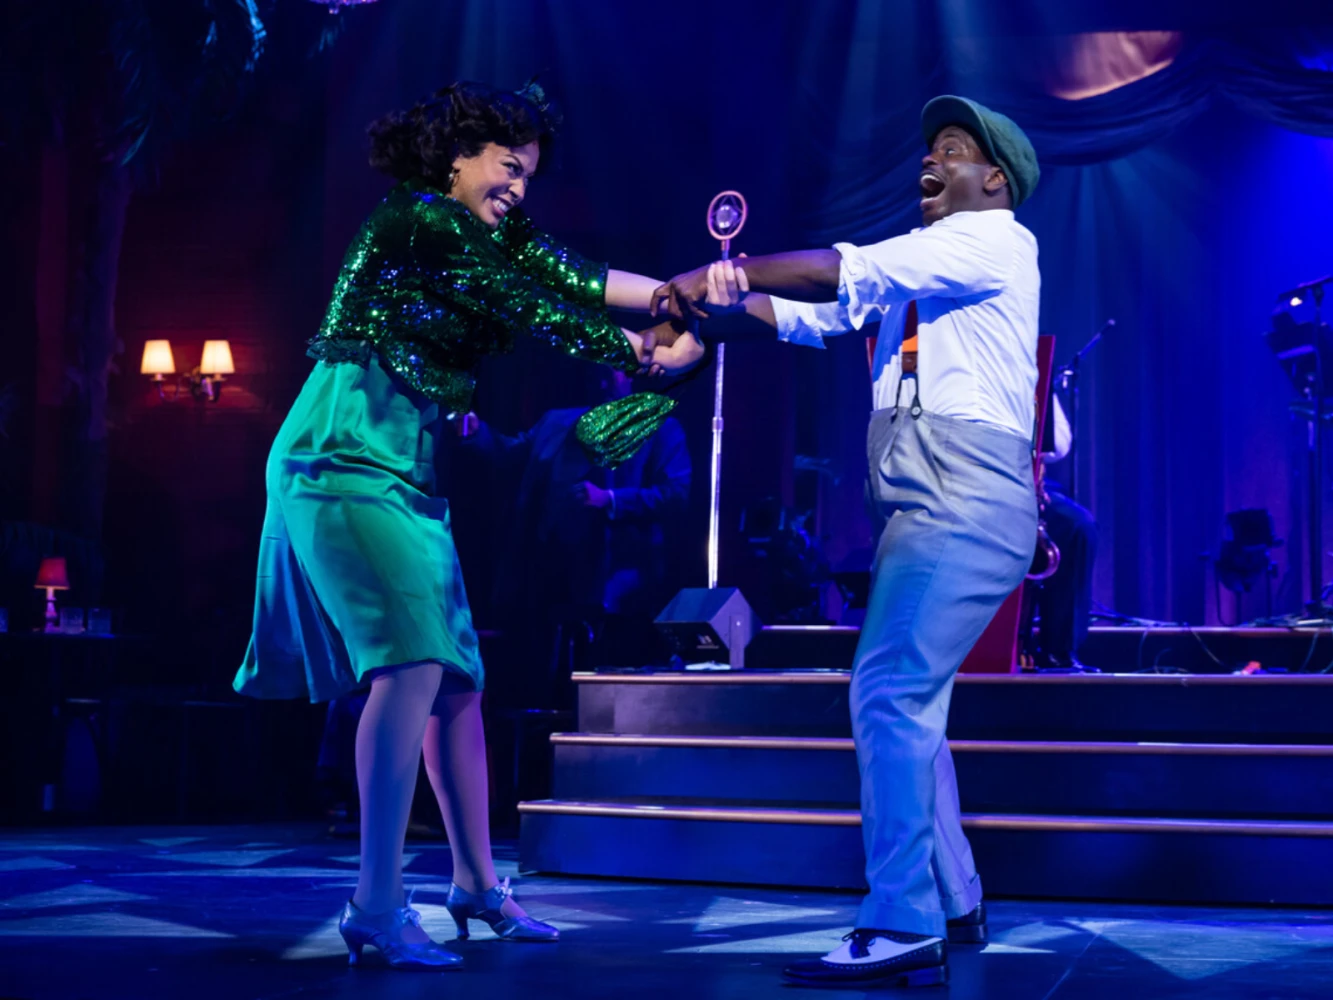 Ain't Misbehavin': What to expect - 1